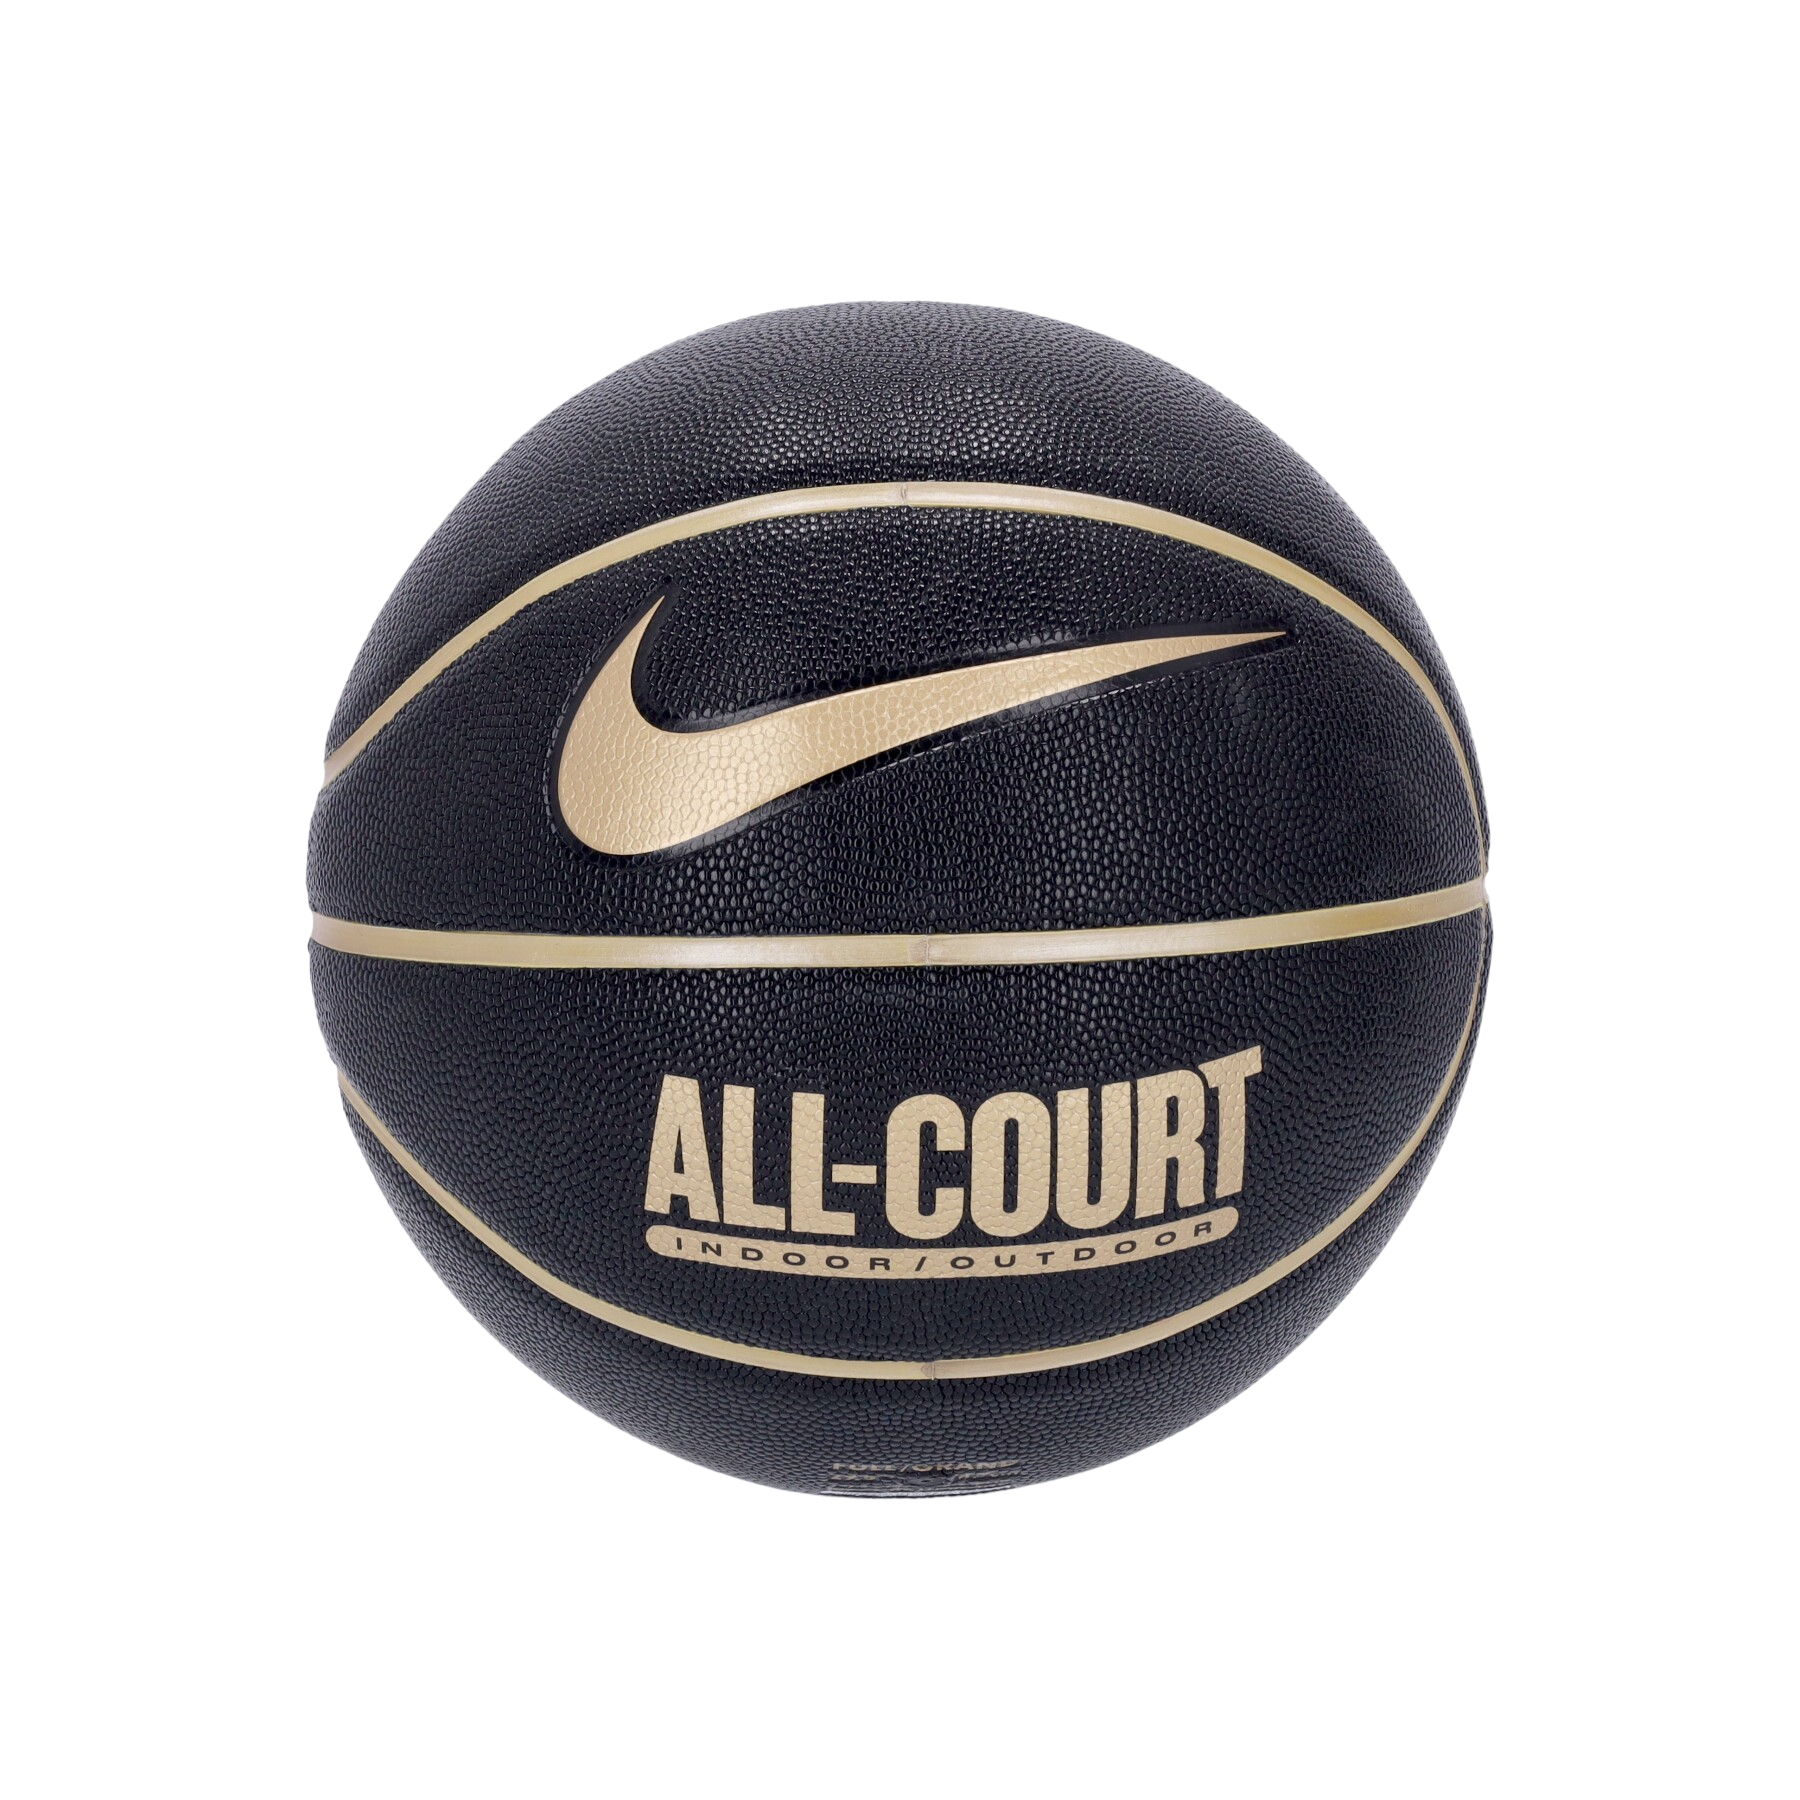 Nike Basketball Every Day All Court